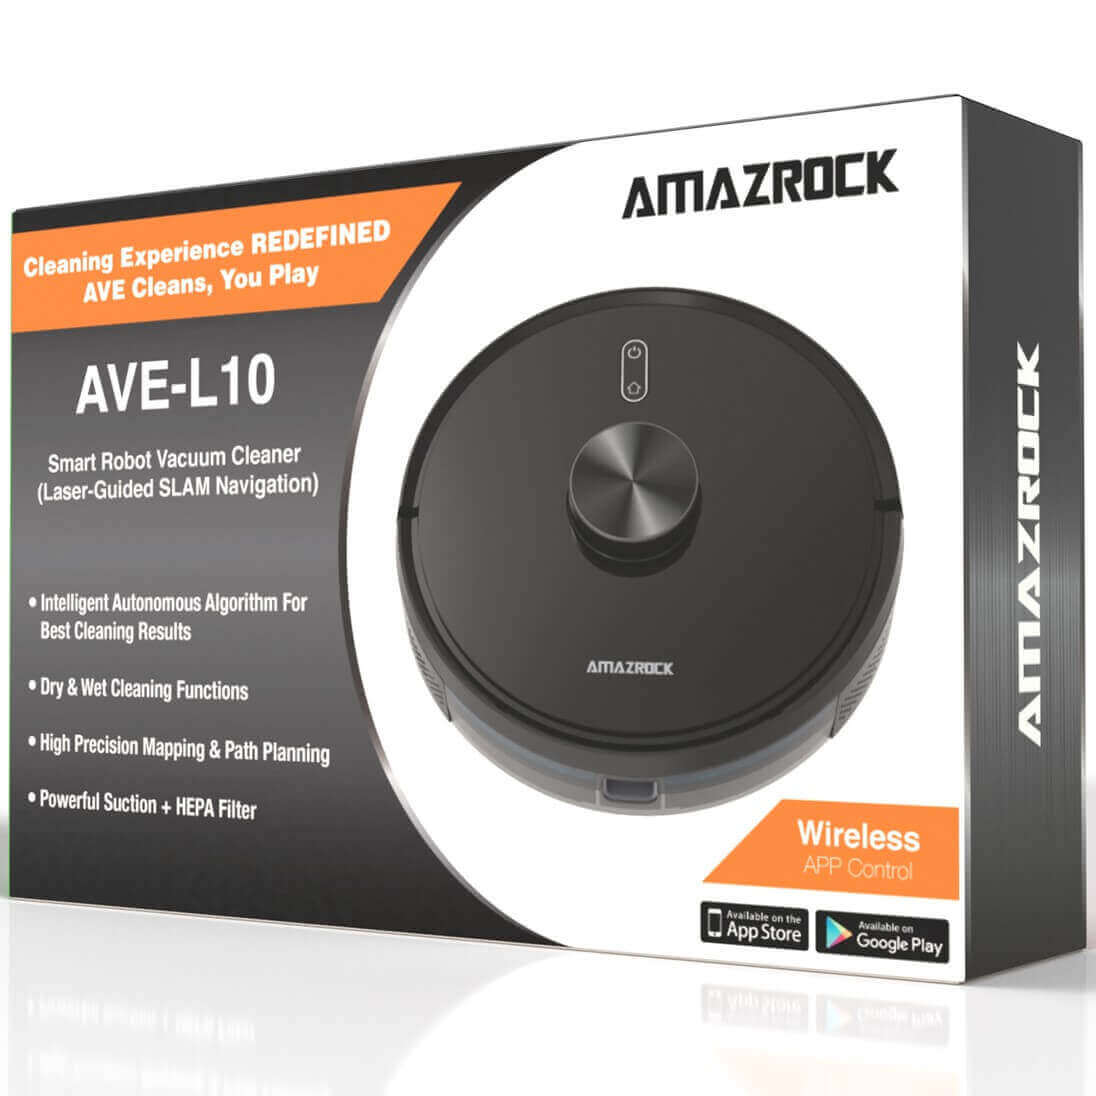 The Vacuum and Mop Combo Robot by Amazrock | AVE-L10 Smart Robot Vacuum and Mop LIDAR With Packaging